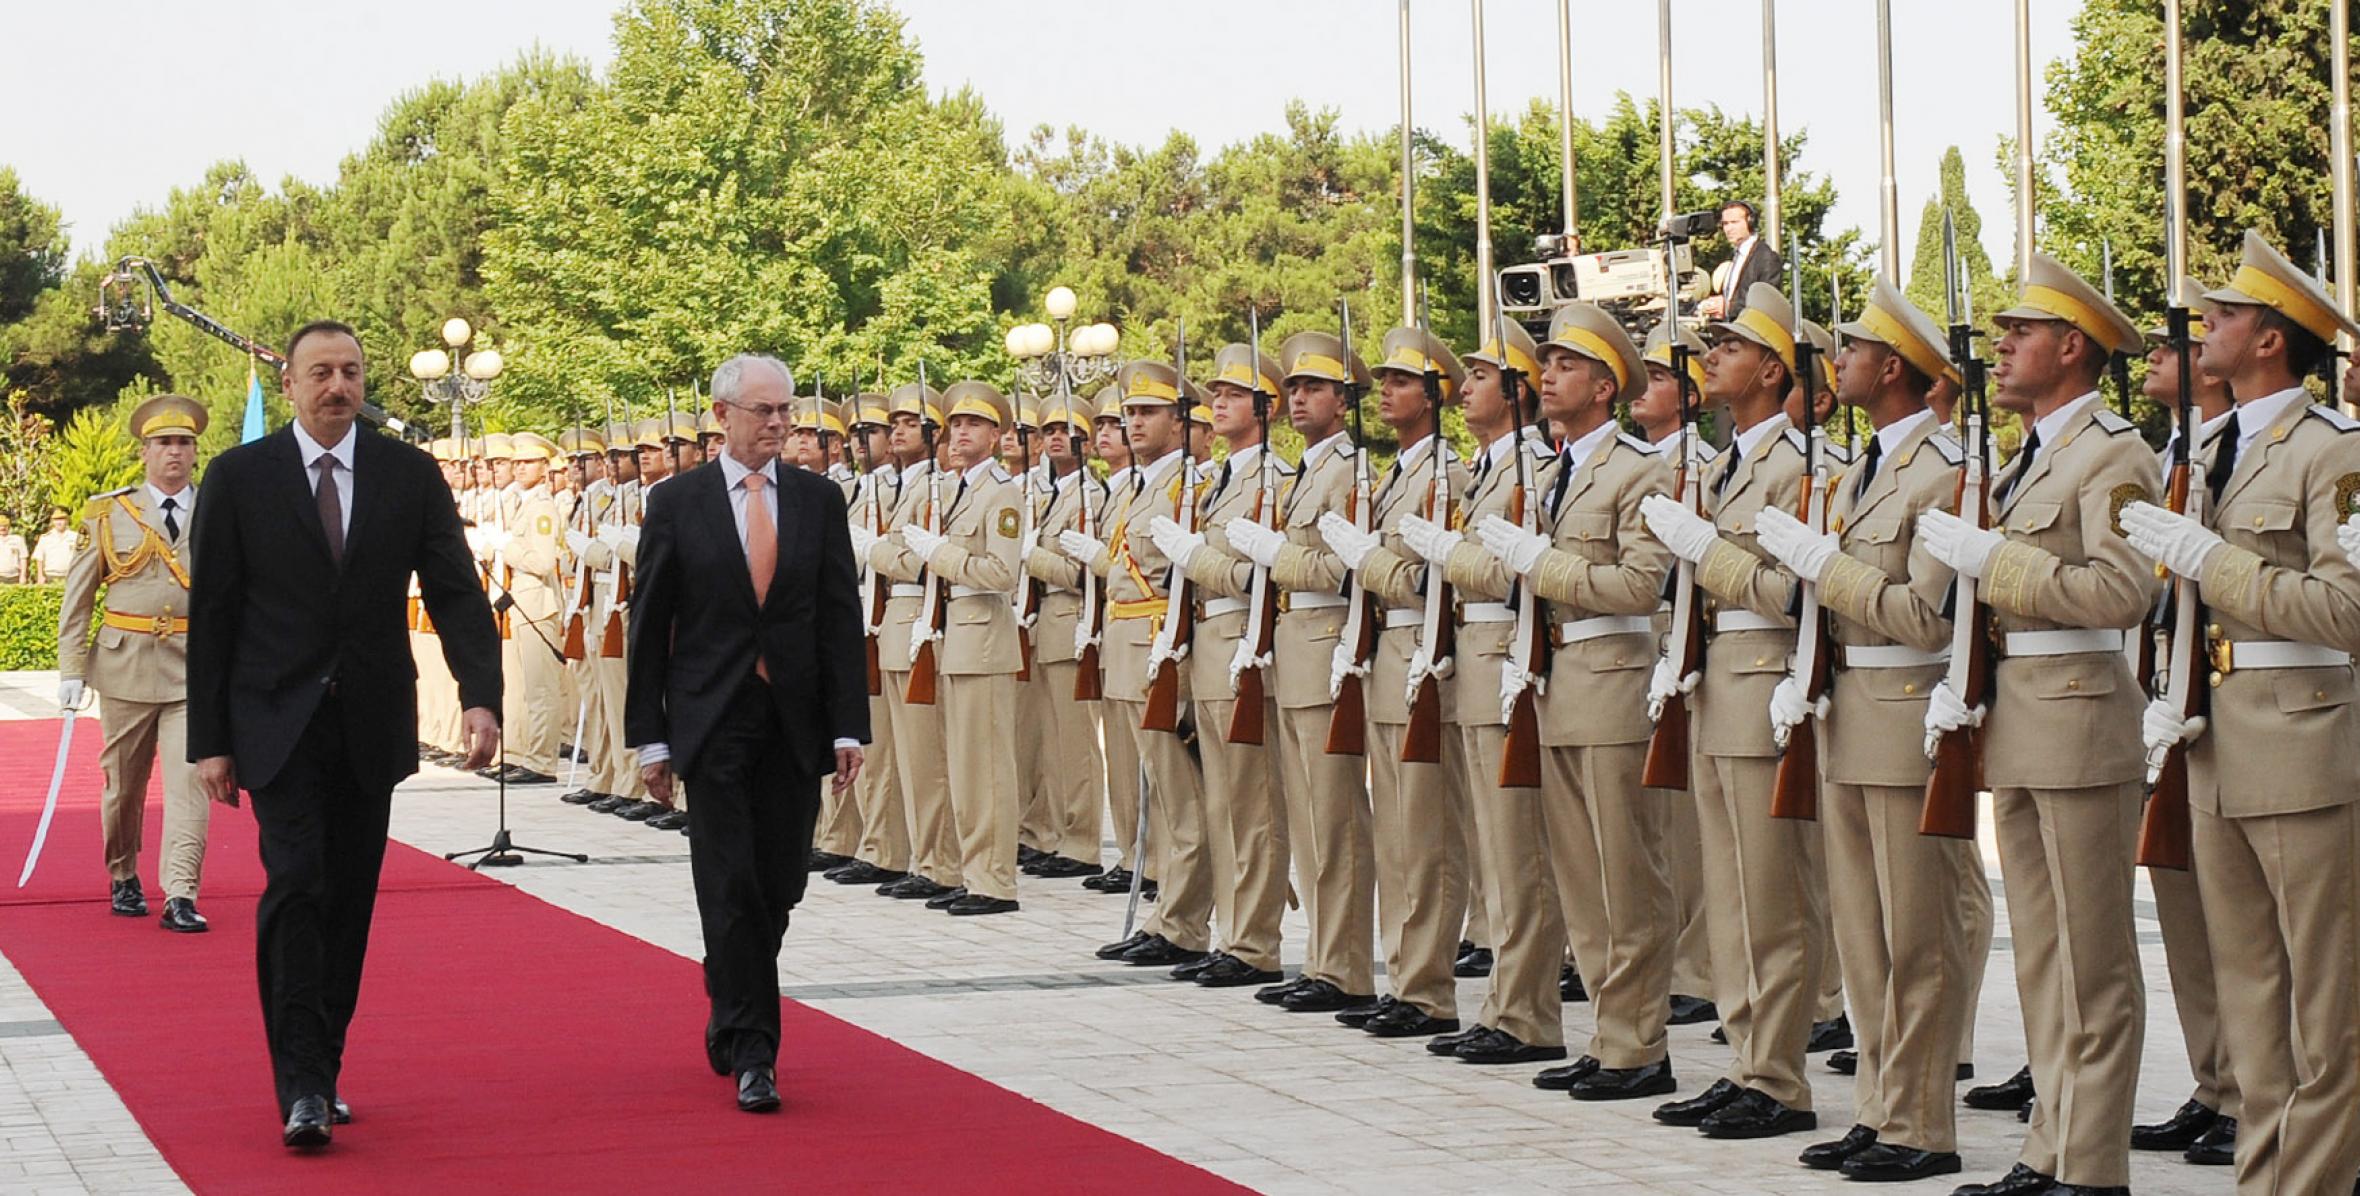 Official welcoming ceremony of the President of the European Council, Herman Van Rompuy, was held